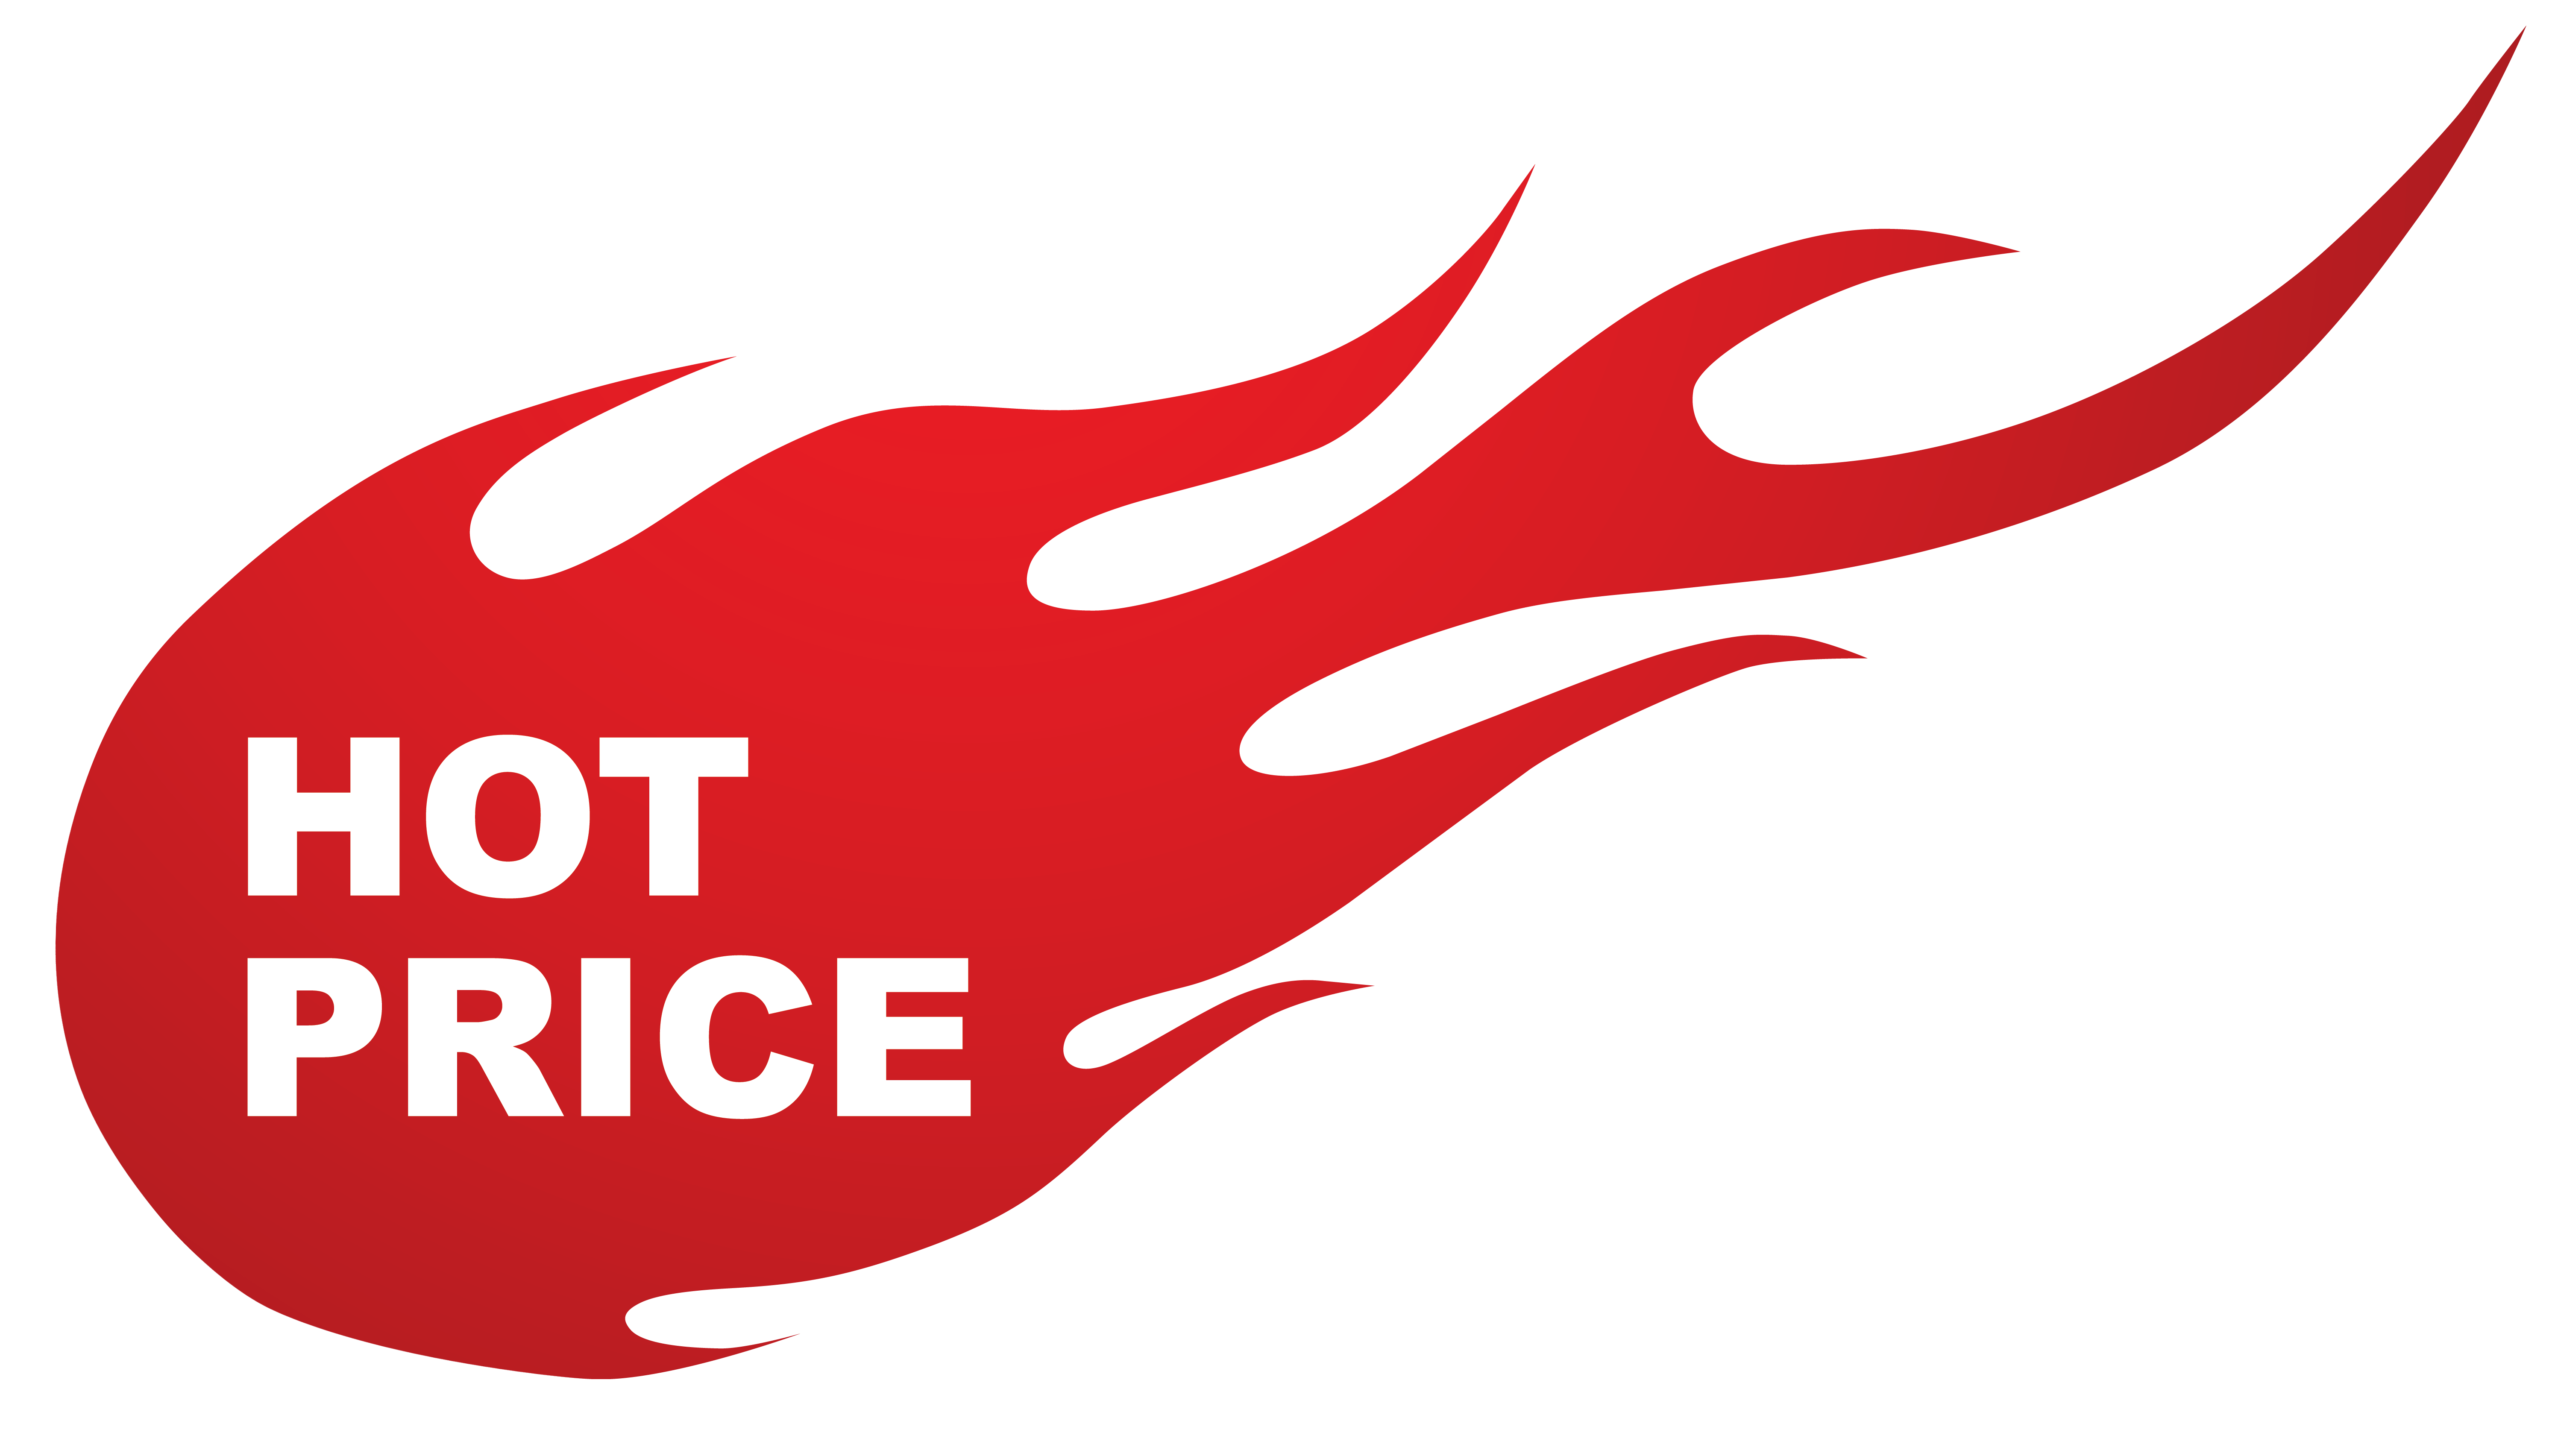 Hot Price Fire Sticker PNG Clipart Image 